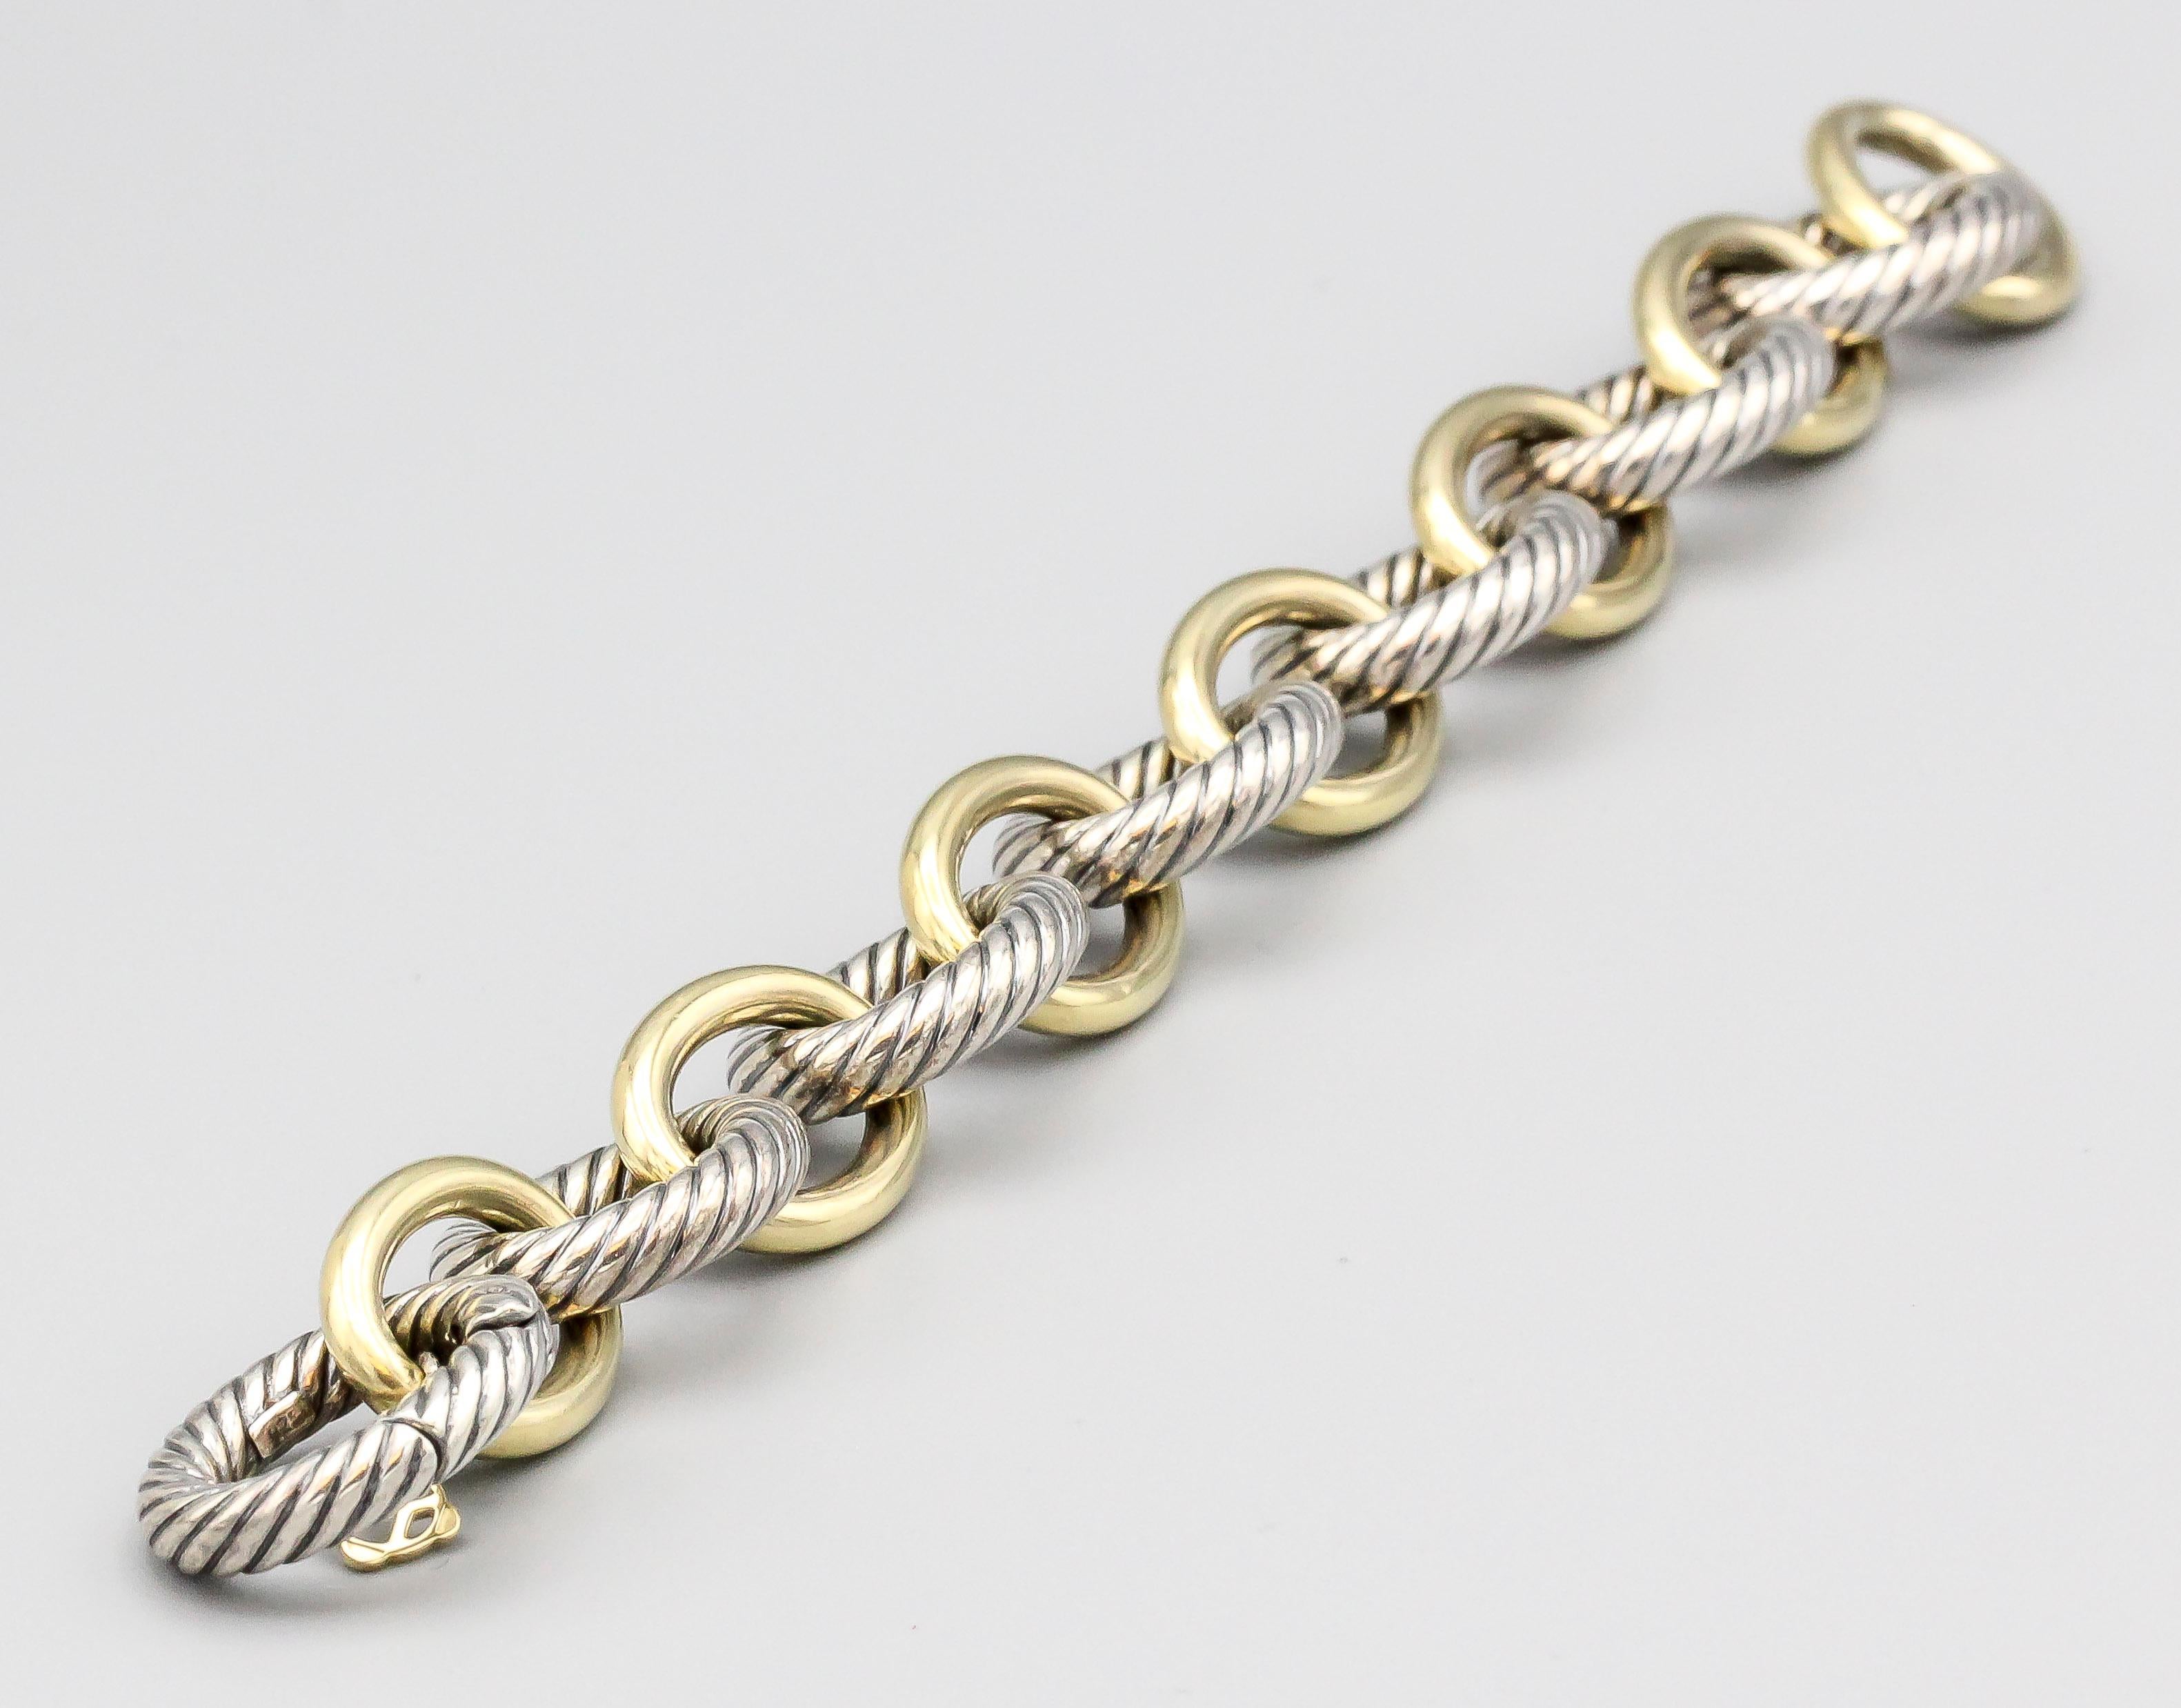 Chic extra large sterling silver and 18k yellow gold oval link bracelet by David Yurman. Current retail approx. $2100. Comes with original pouch.